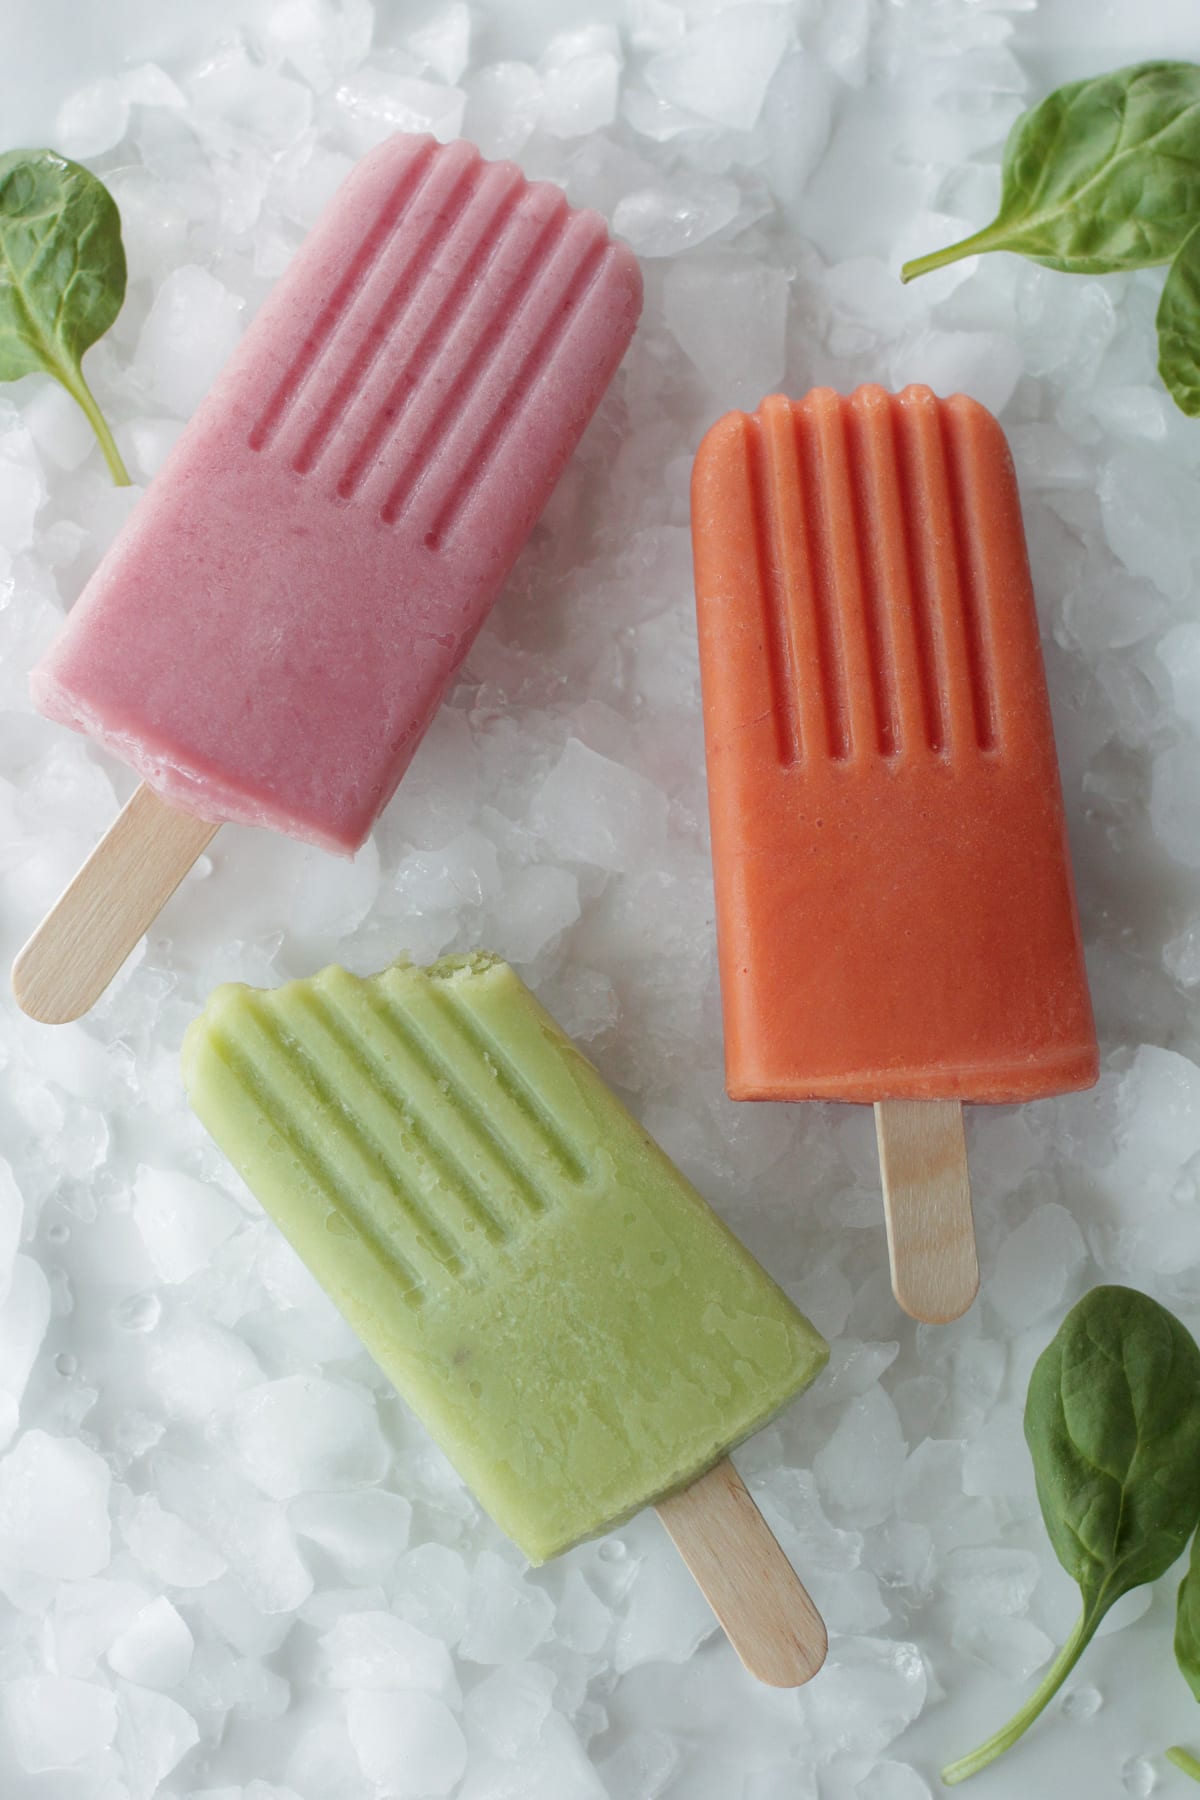 Frozen treats to stop buying and start making. Here are some of the top popular frozen treats, including ice cream and popsicles, from the store or ice cream shop that you can absolutely make at home